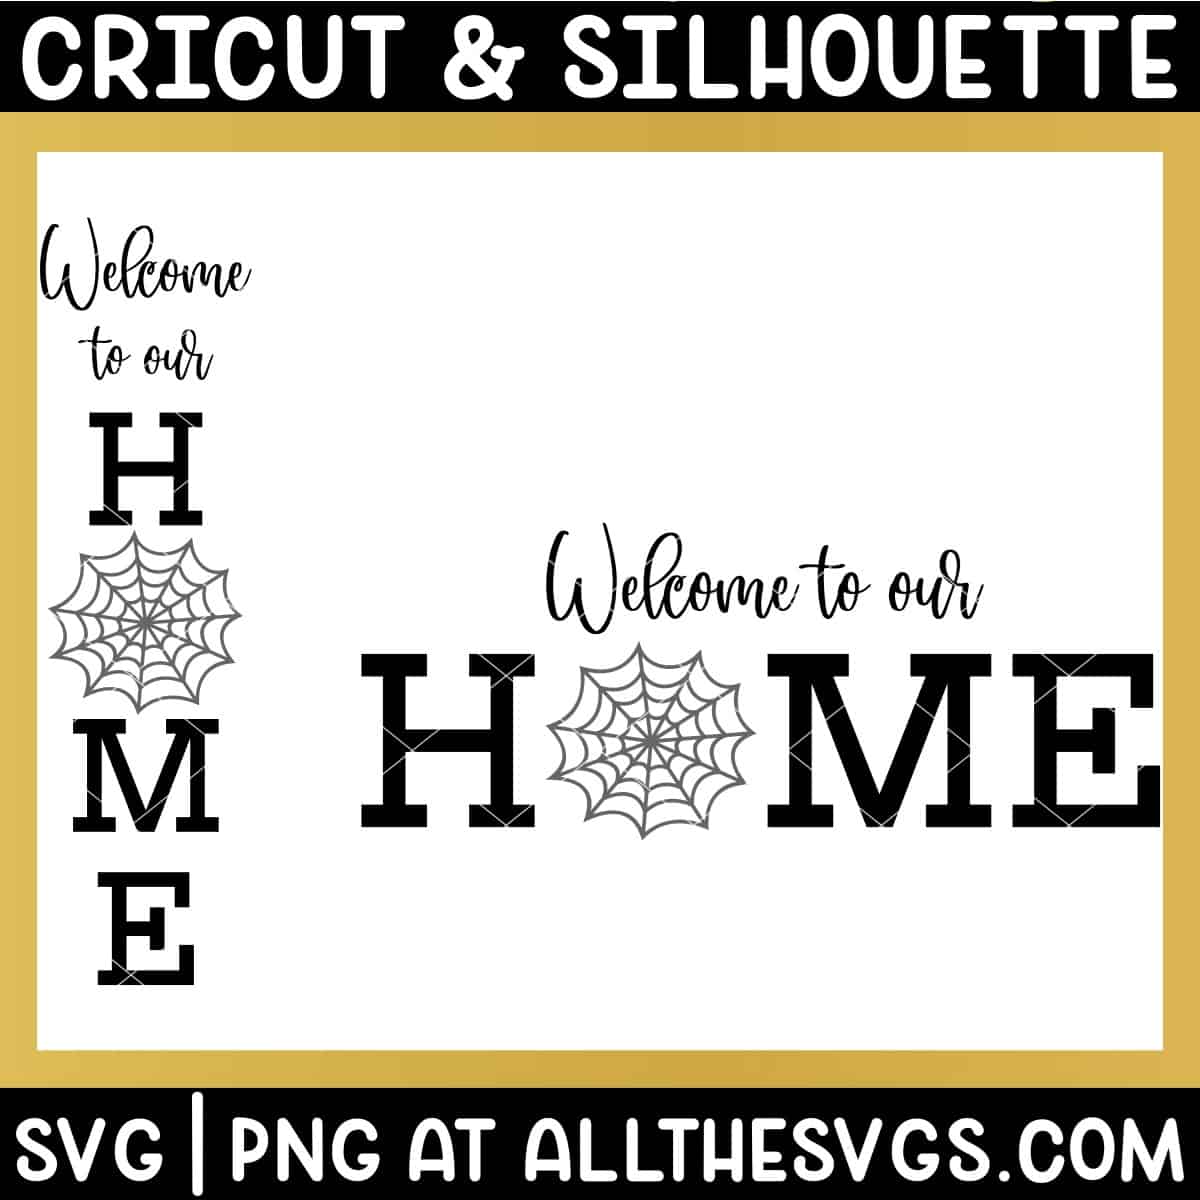 welcome to our home sign svg file with spider web.